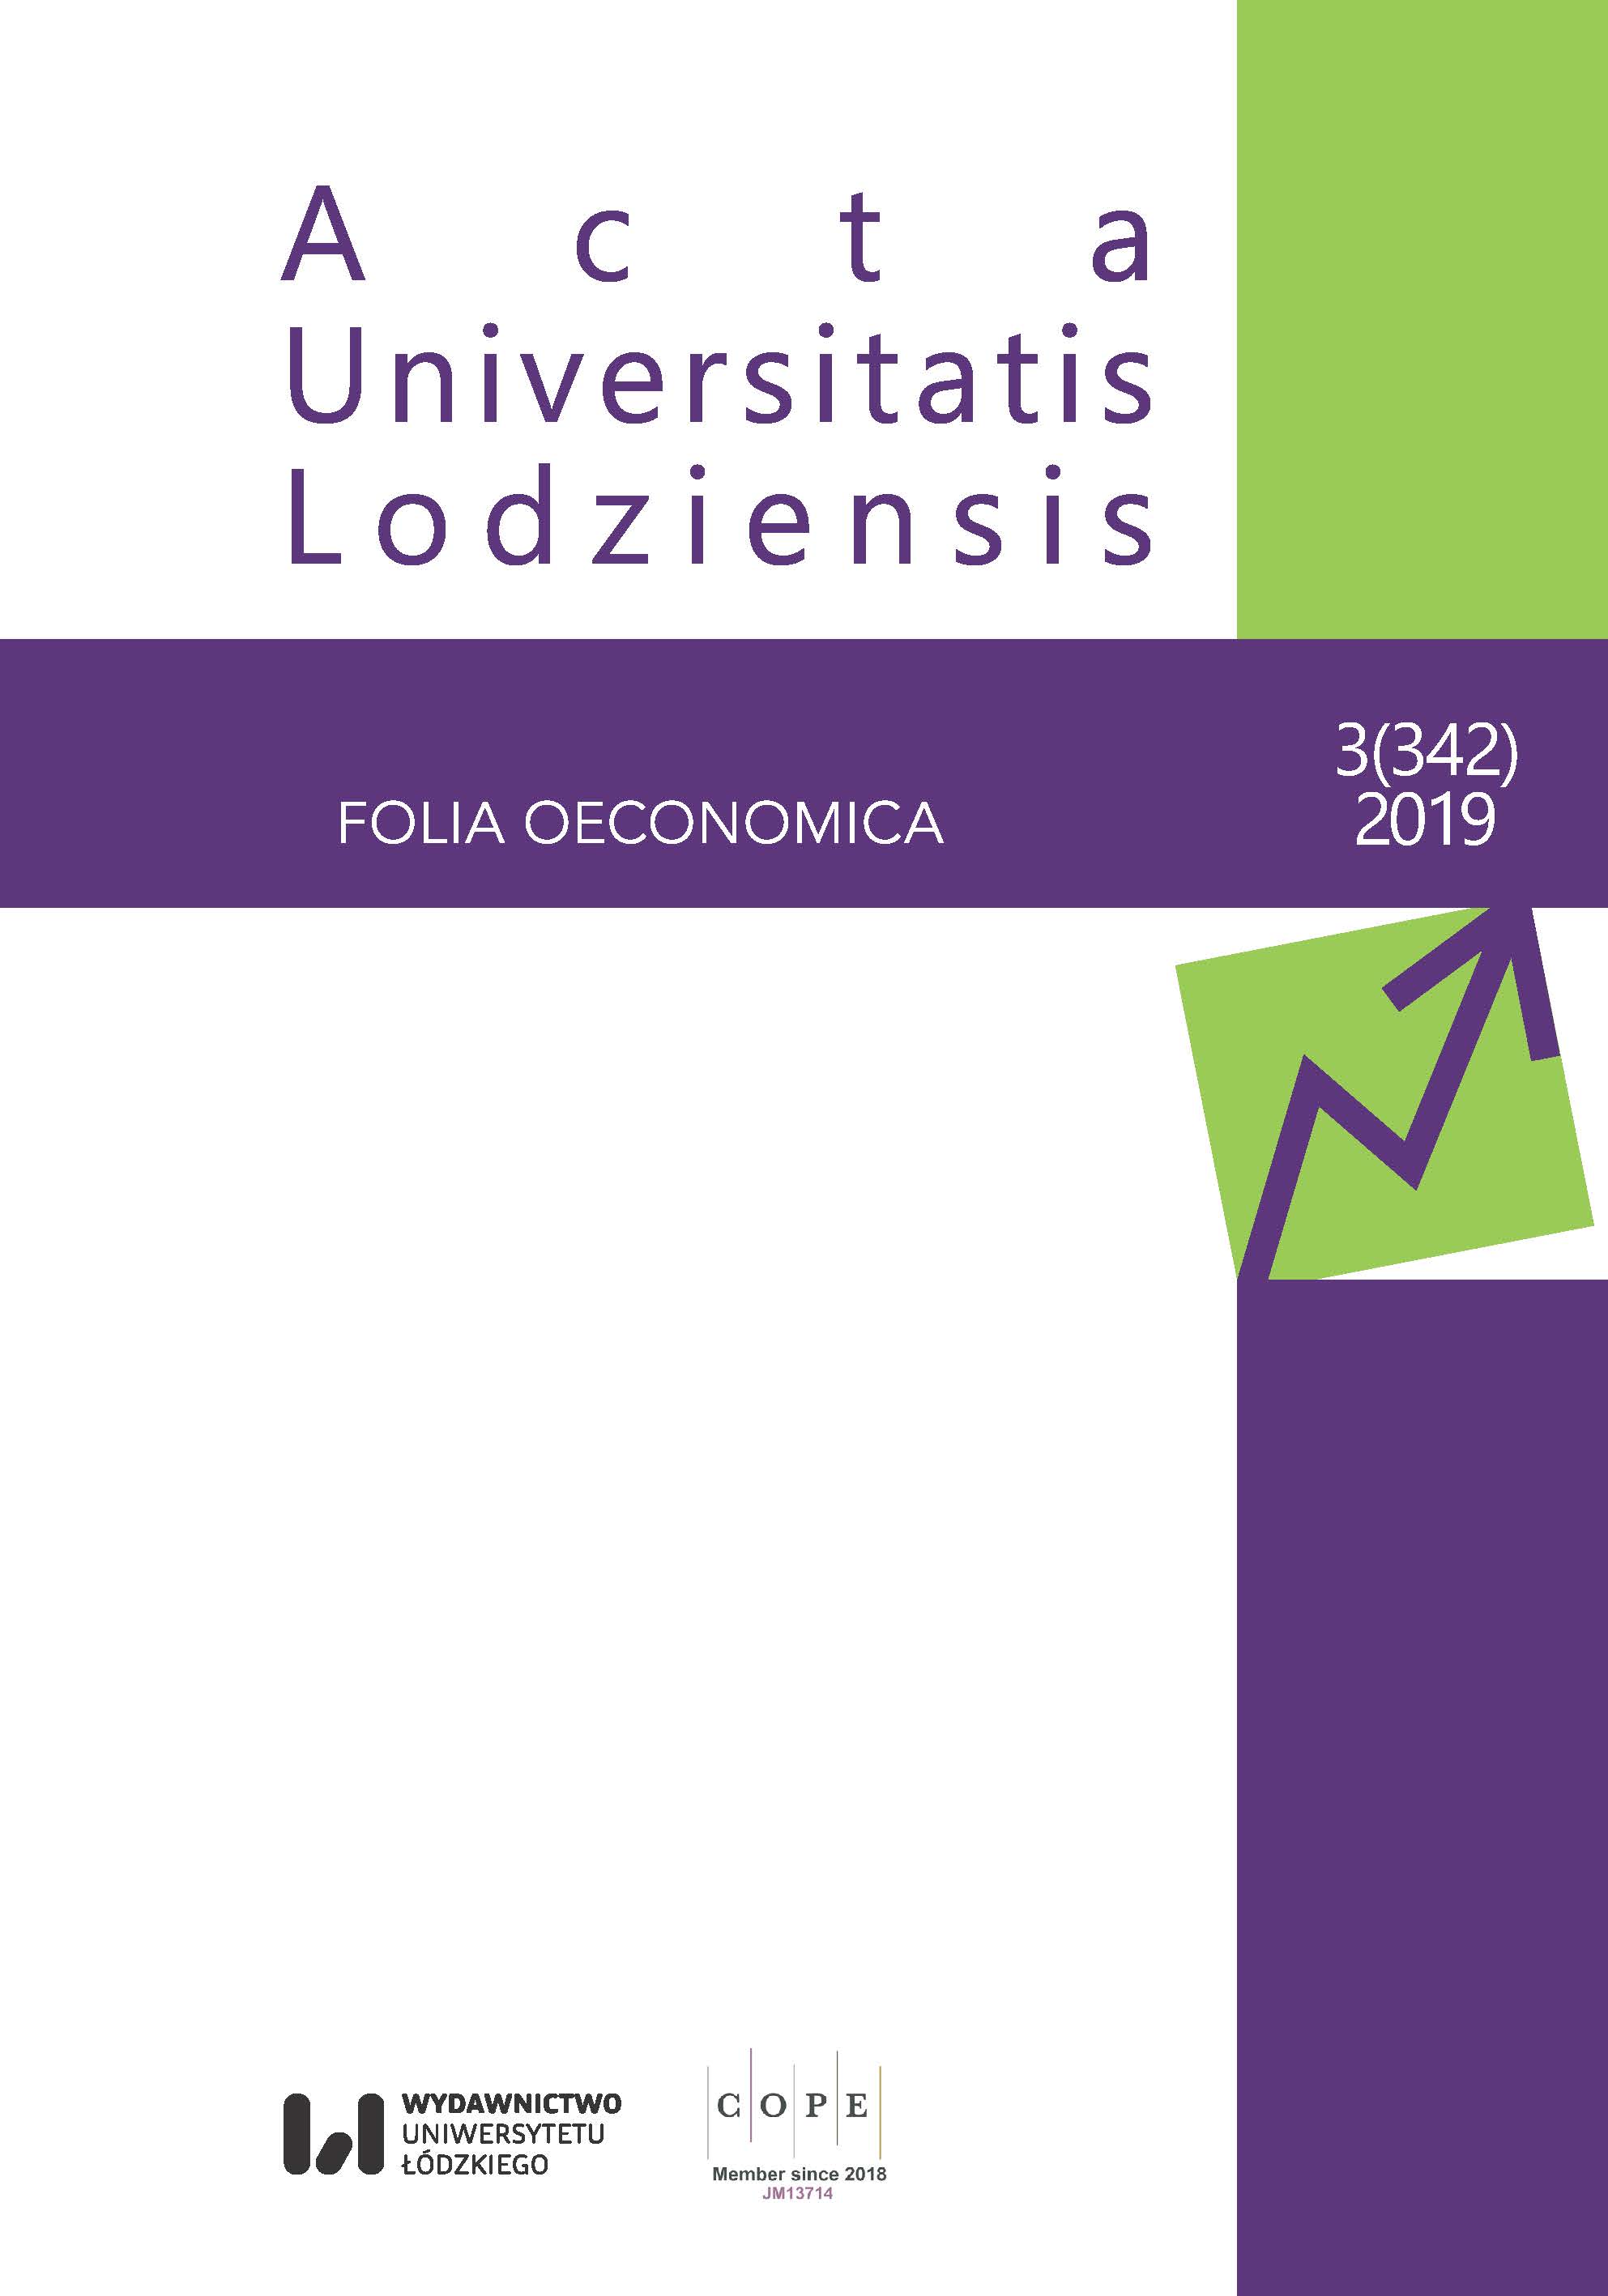 Do Malignant Neoplasms Contributed to Excess Mortality of Males Aged 65 and More in the Lodz Region from 1999 to 2014? Cover Image